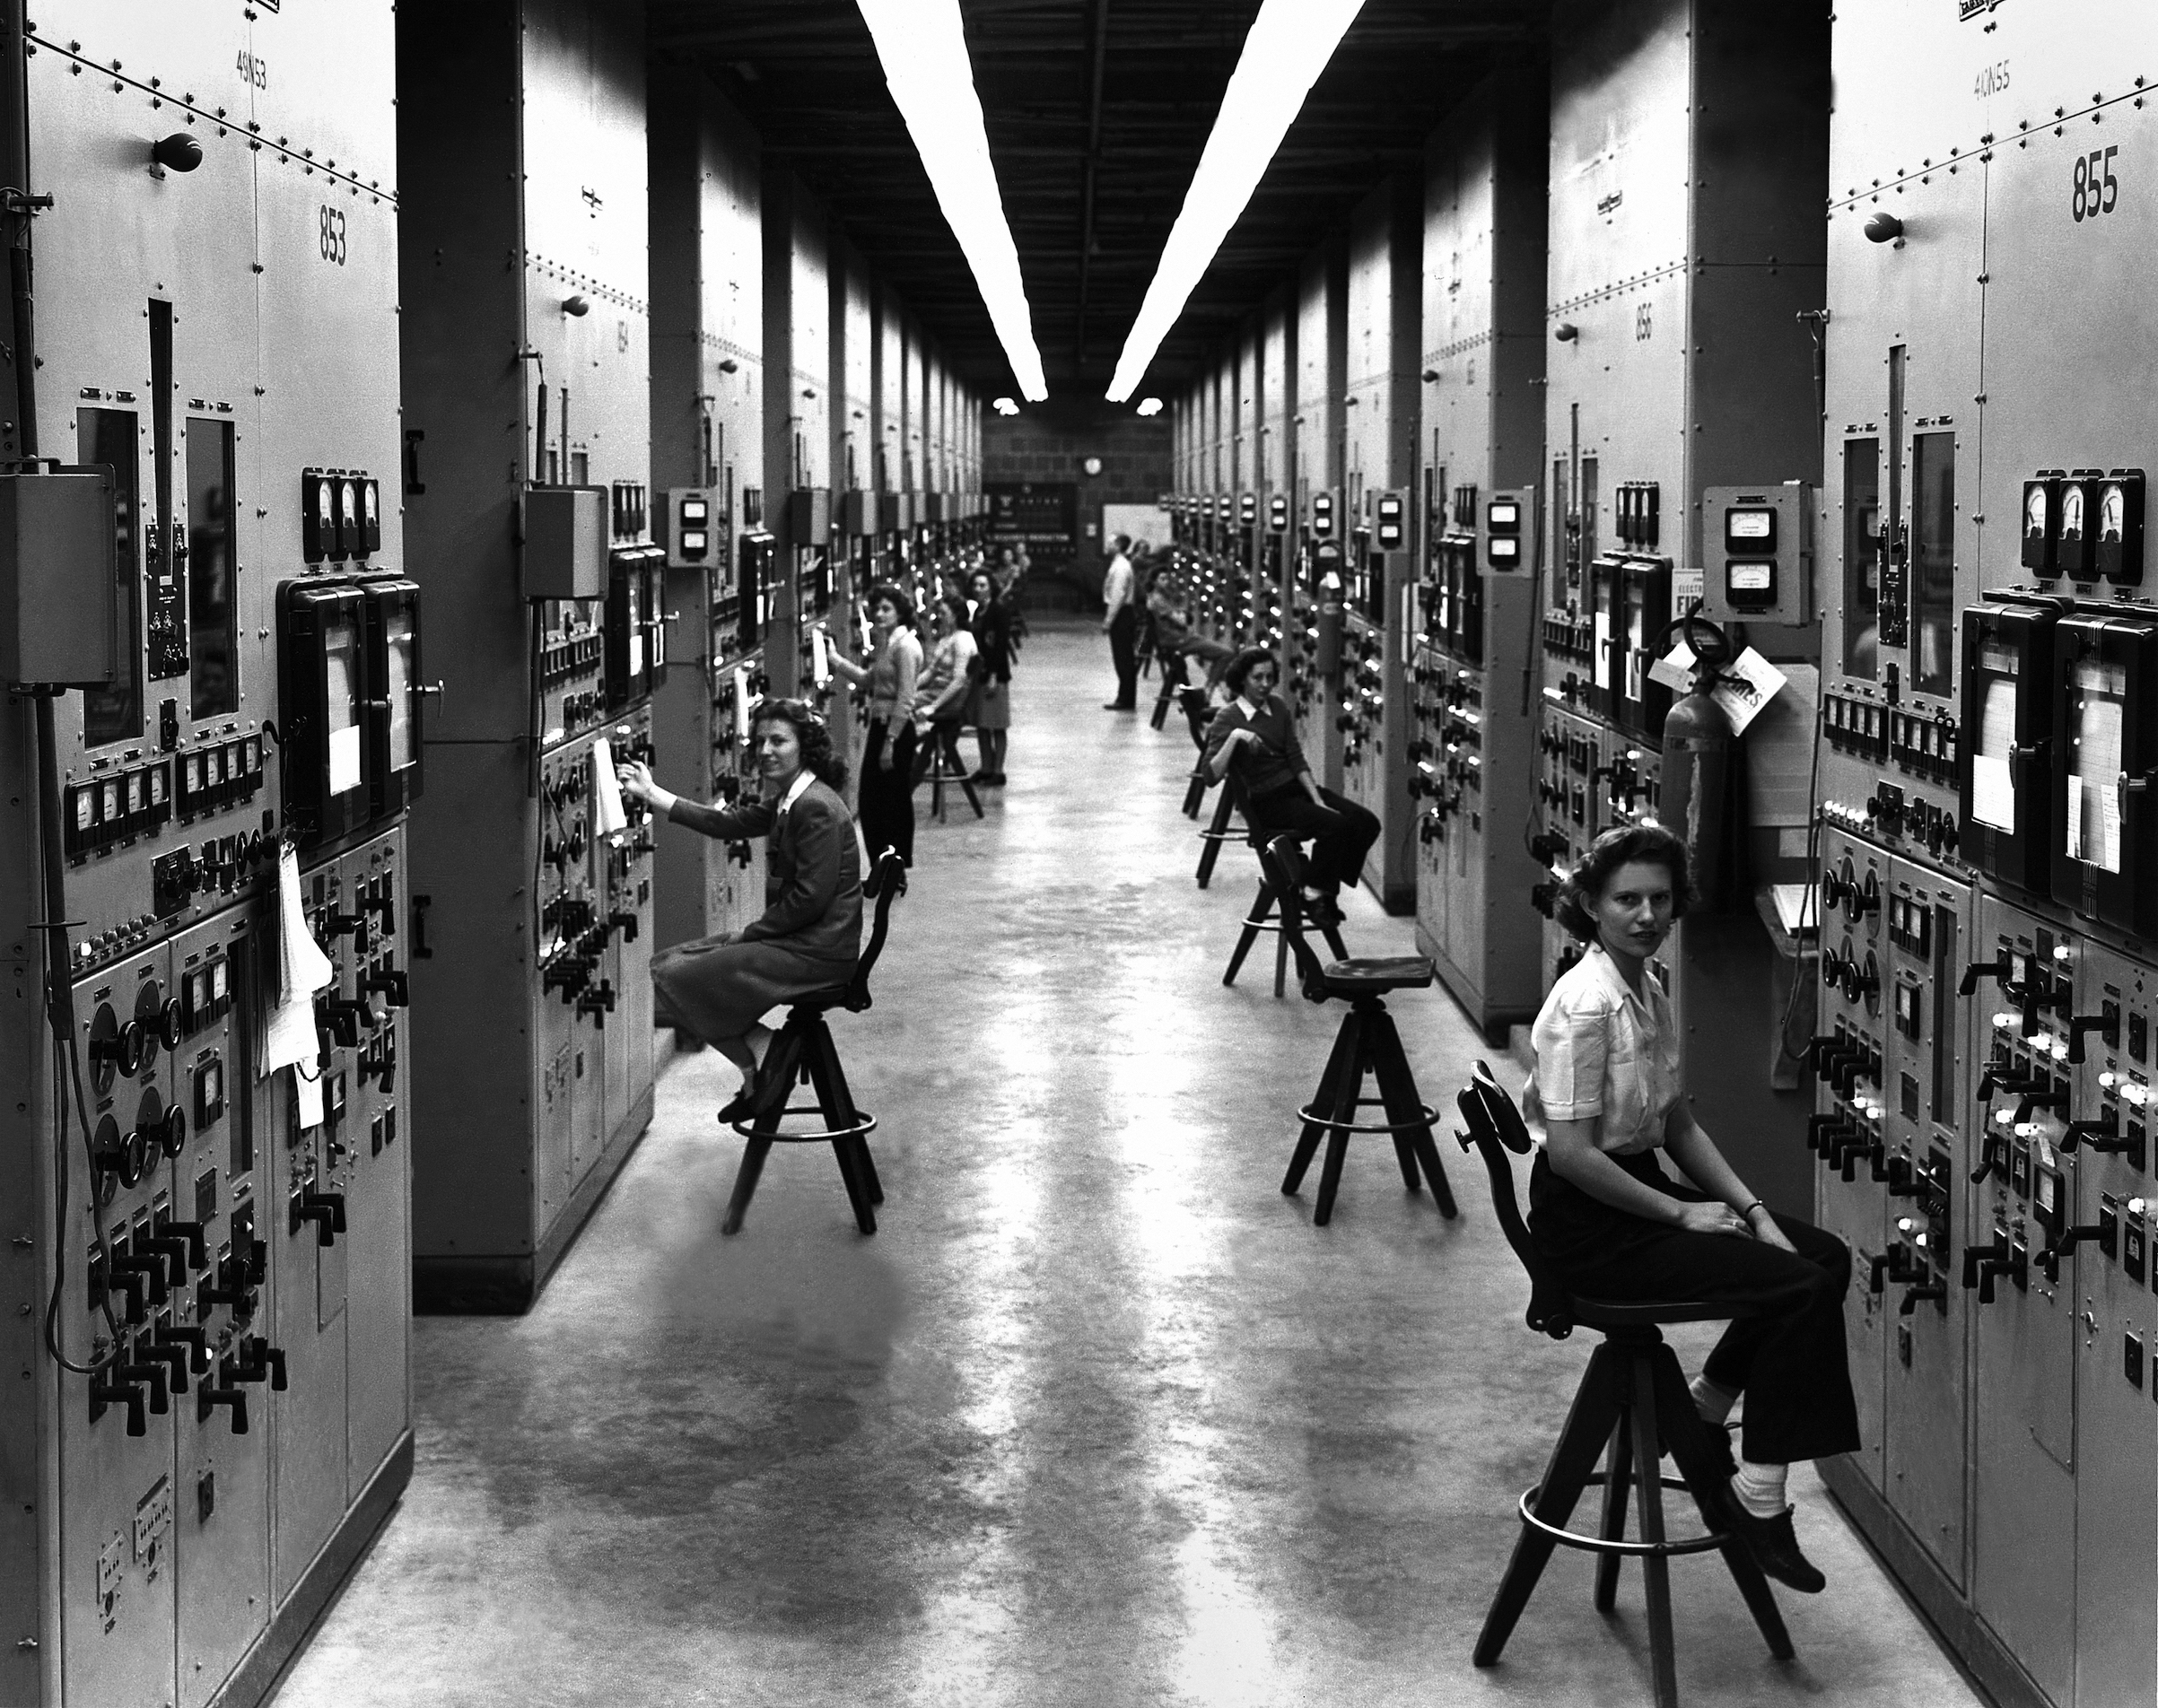 Calutron operators at their panels, in the Y-12 plant at Oak Ridge during World War II. 1944. The calutrons were used to refine uranium ore into fissile material. During the Manhattan Project effort to construct an atomic explosive, workers toiled in secrecy, with no idea to what end their labors were directed. Gladys Owens, the woman seated in the foreground, did not realize what she had been doing until seeing this photo in a public tour of the facility fifty years later. Tennessee, USA.  (Photo by Galerie Bilderwelt/Getty Images) (Galerie Bilderwelt/Getty Images)